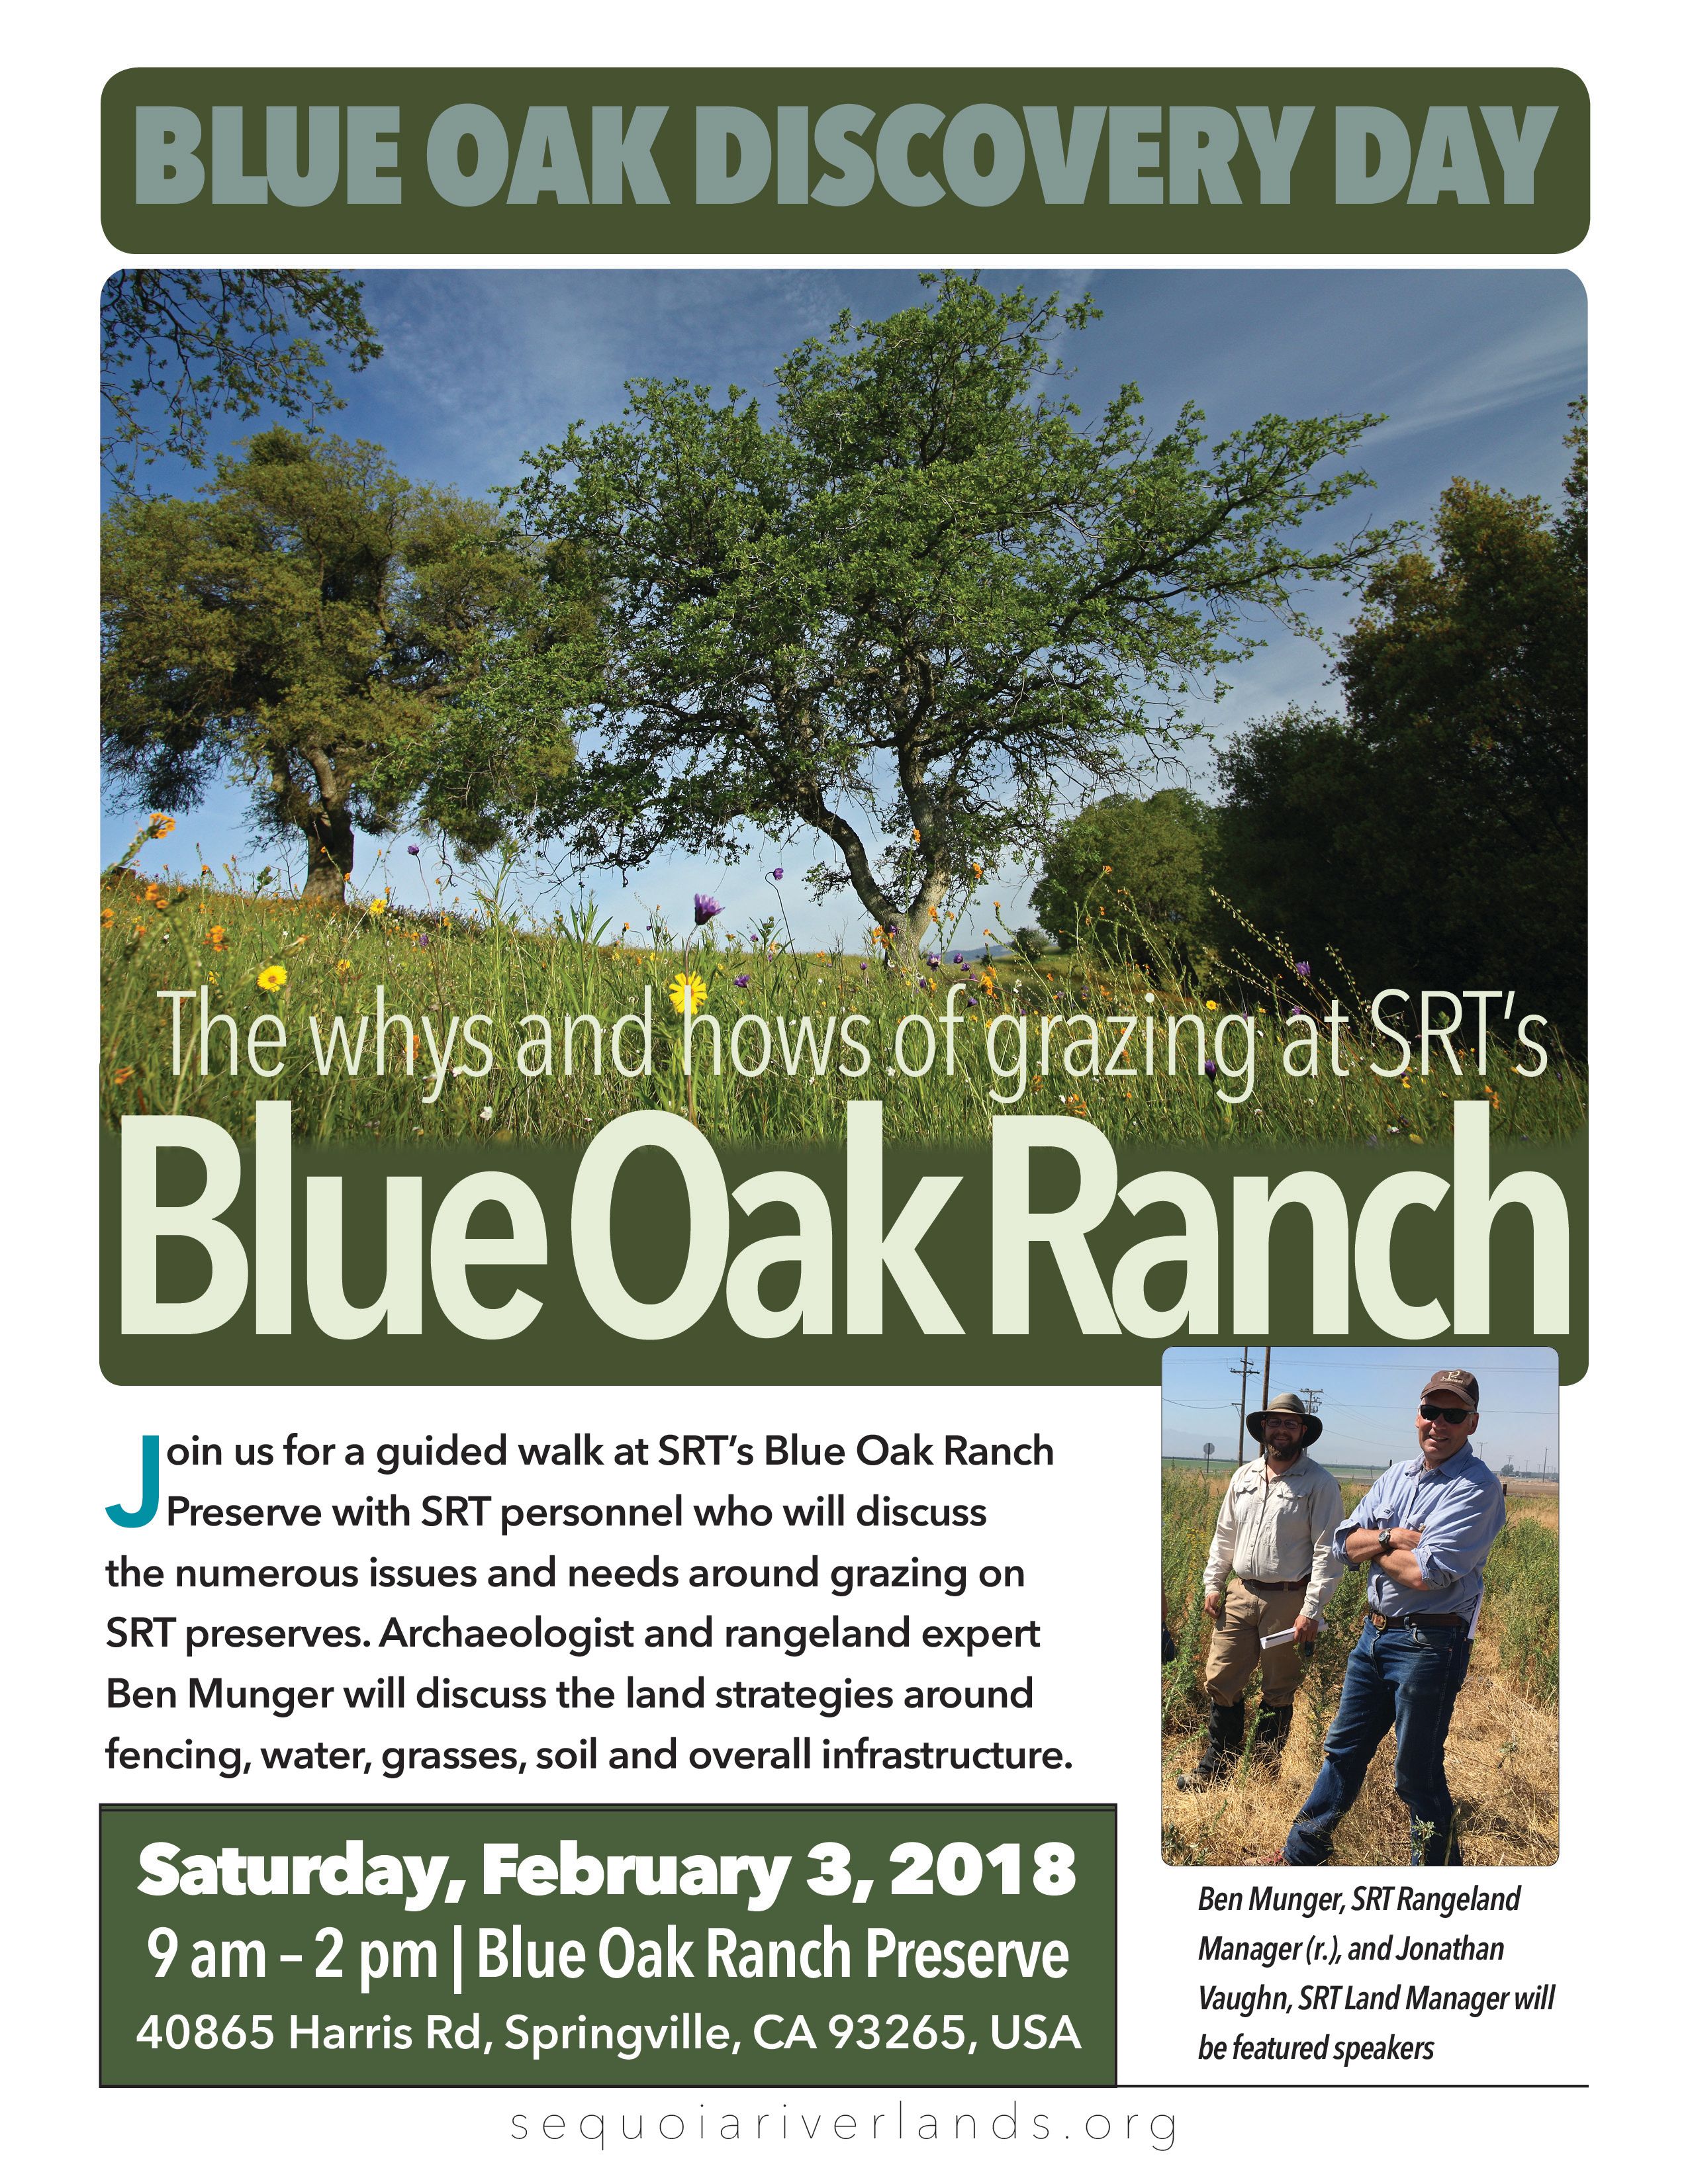 Blue Oak Discovery Day: The Whys and Hows of Grazing